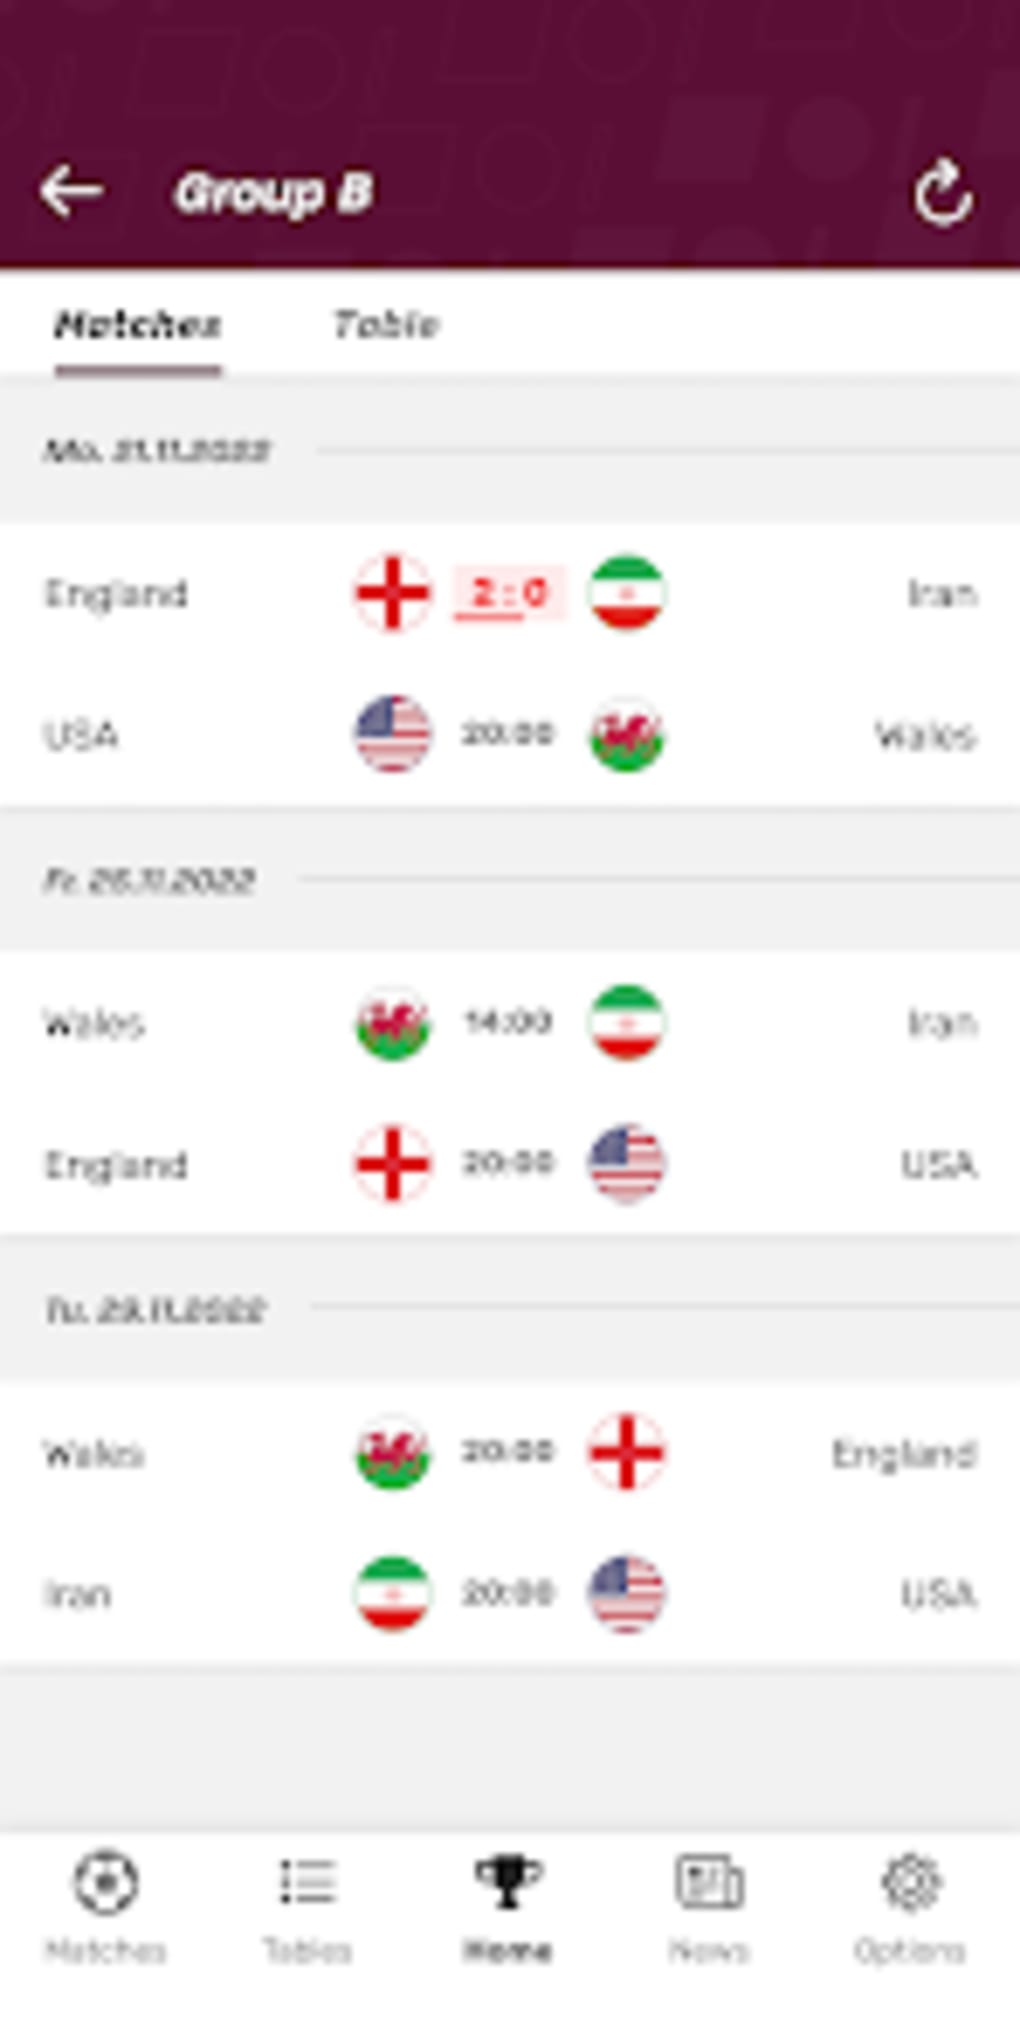 World Soccer Fixtures and Scores for Android